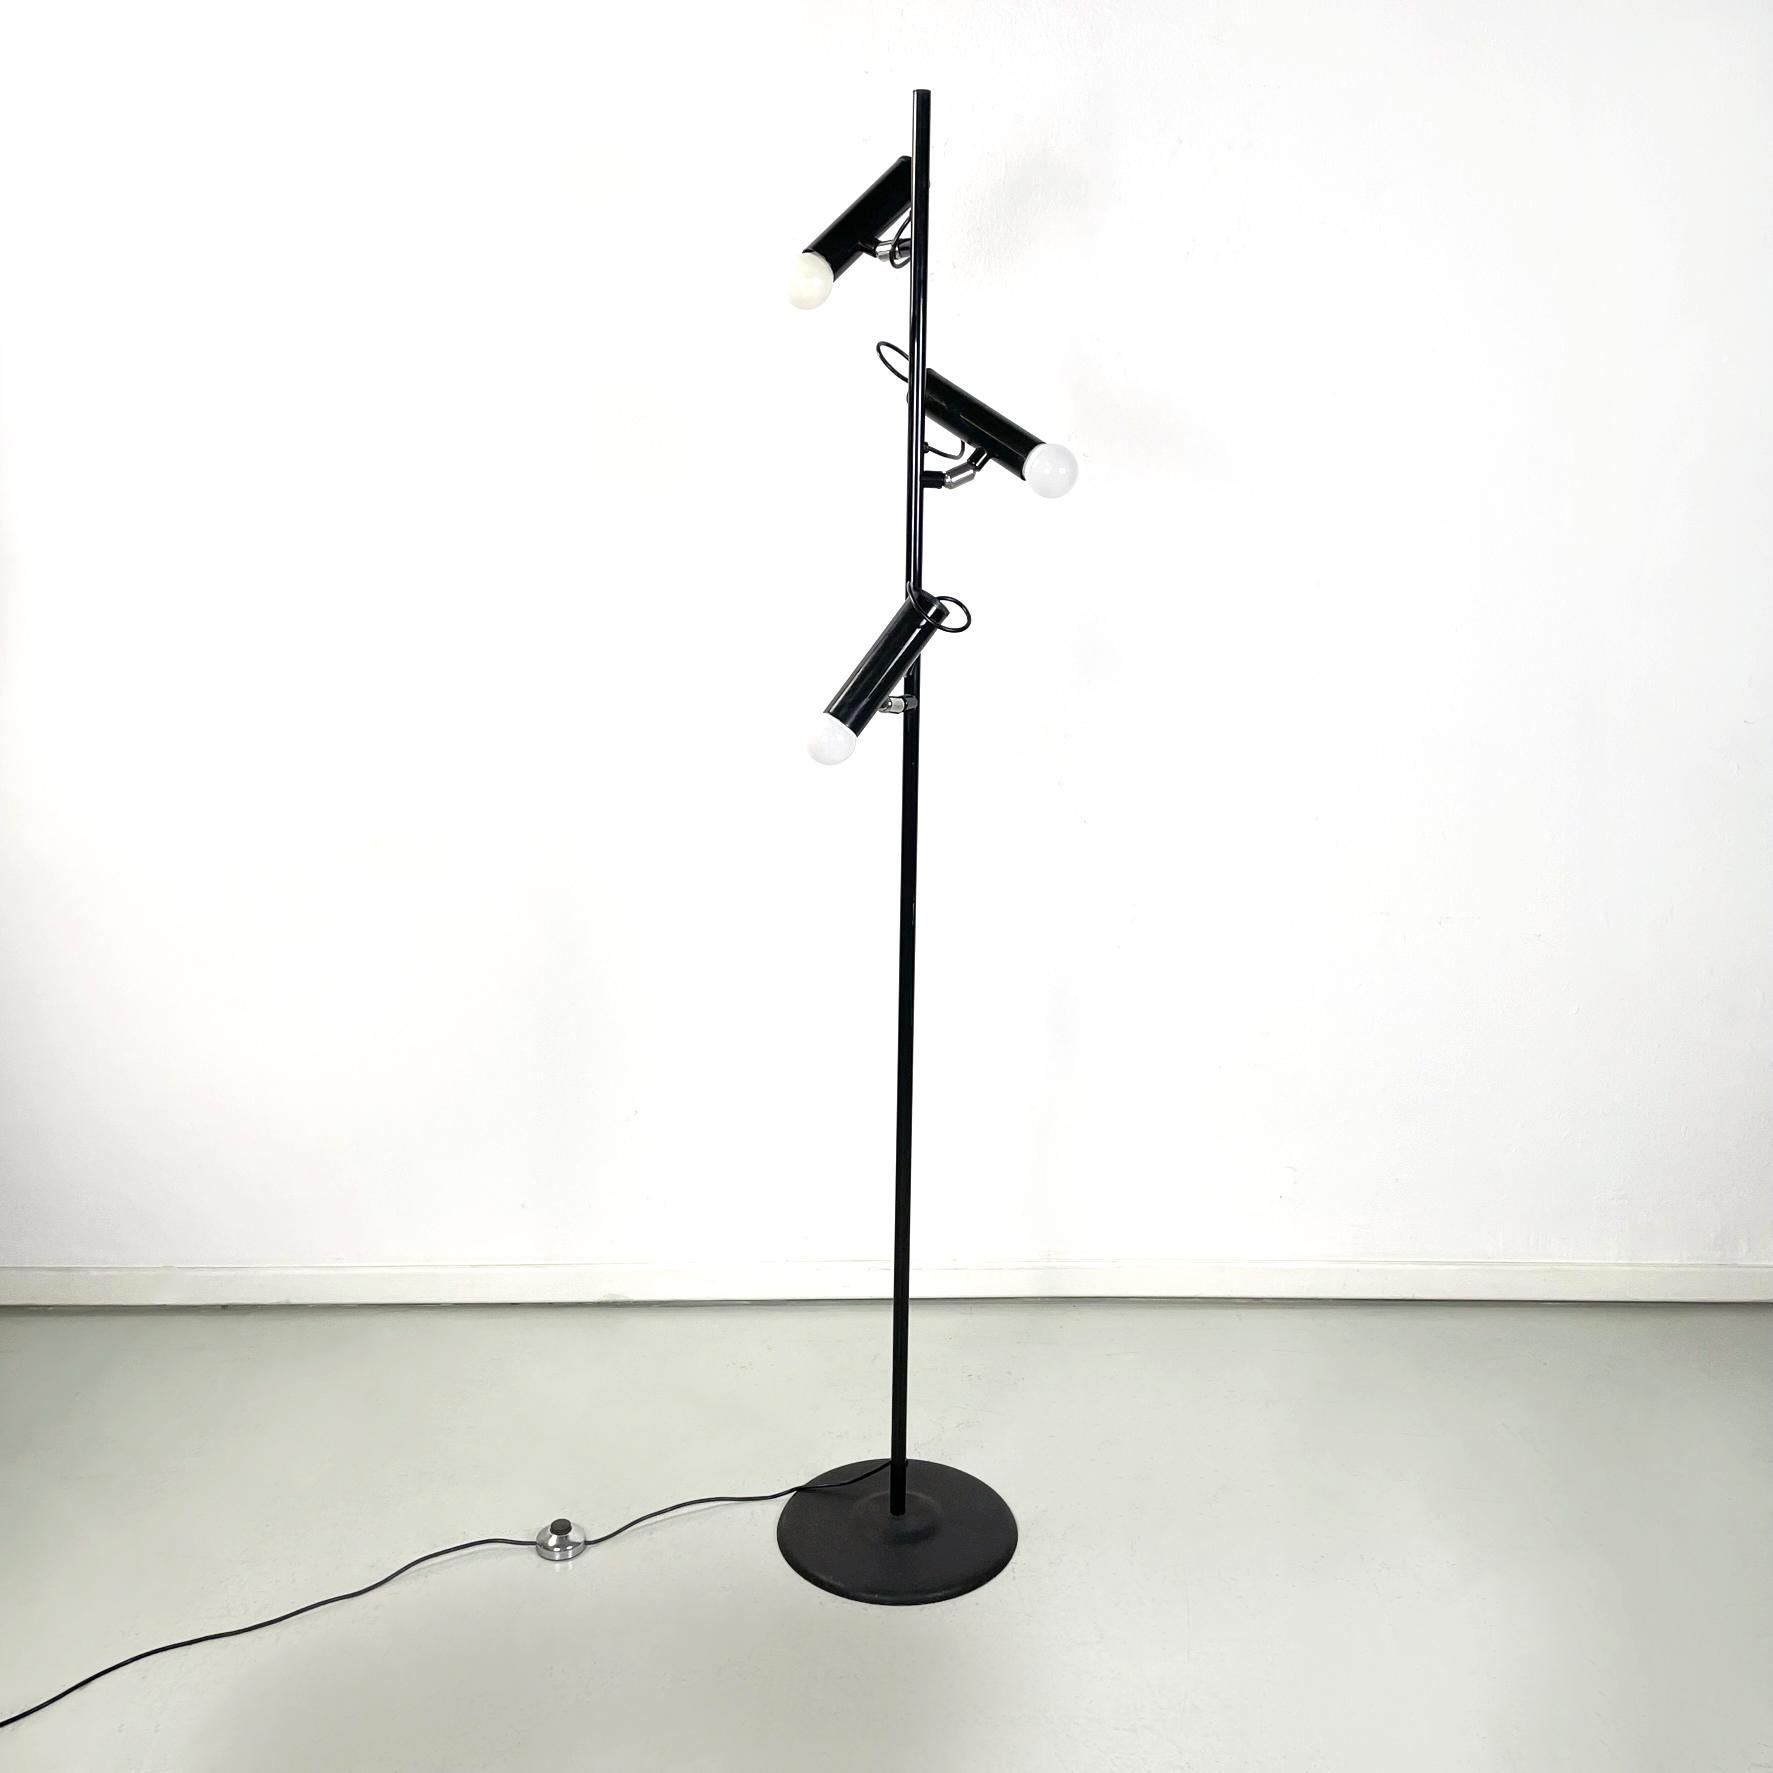 Italian modern Adjustable 3 lights floor lamp P393 by Luci in black metal, 1970s
Floor lamp mod. P393 with 3 adjustable lights. The central structure is in black painted steel rod with the 3 cylindrical diffusers, also in black steel. Round base in